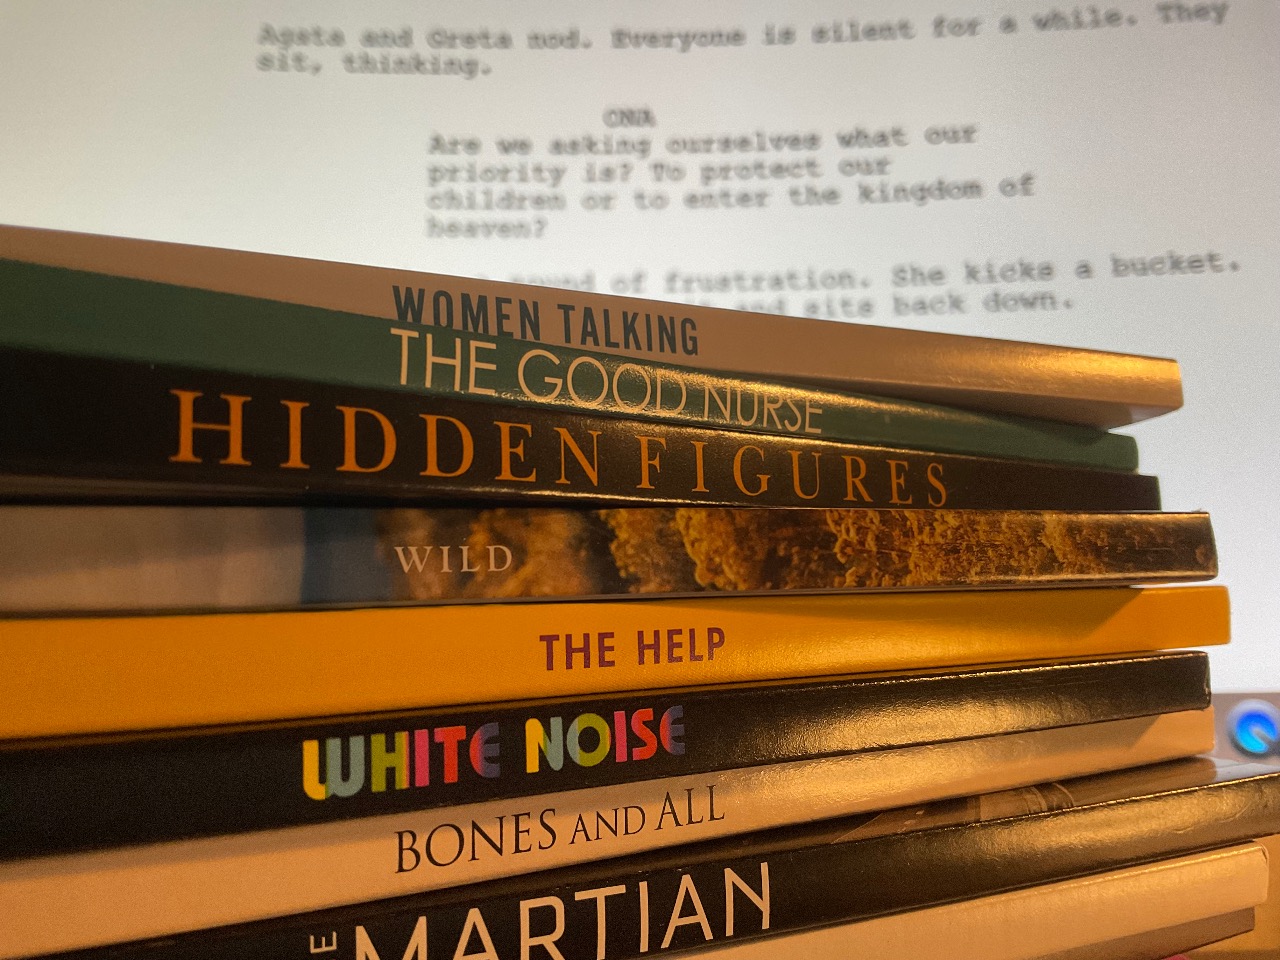 Examples of successful book to screen adaptations - Hidden Figures, The Wild, The Help, White Noise, The Martian